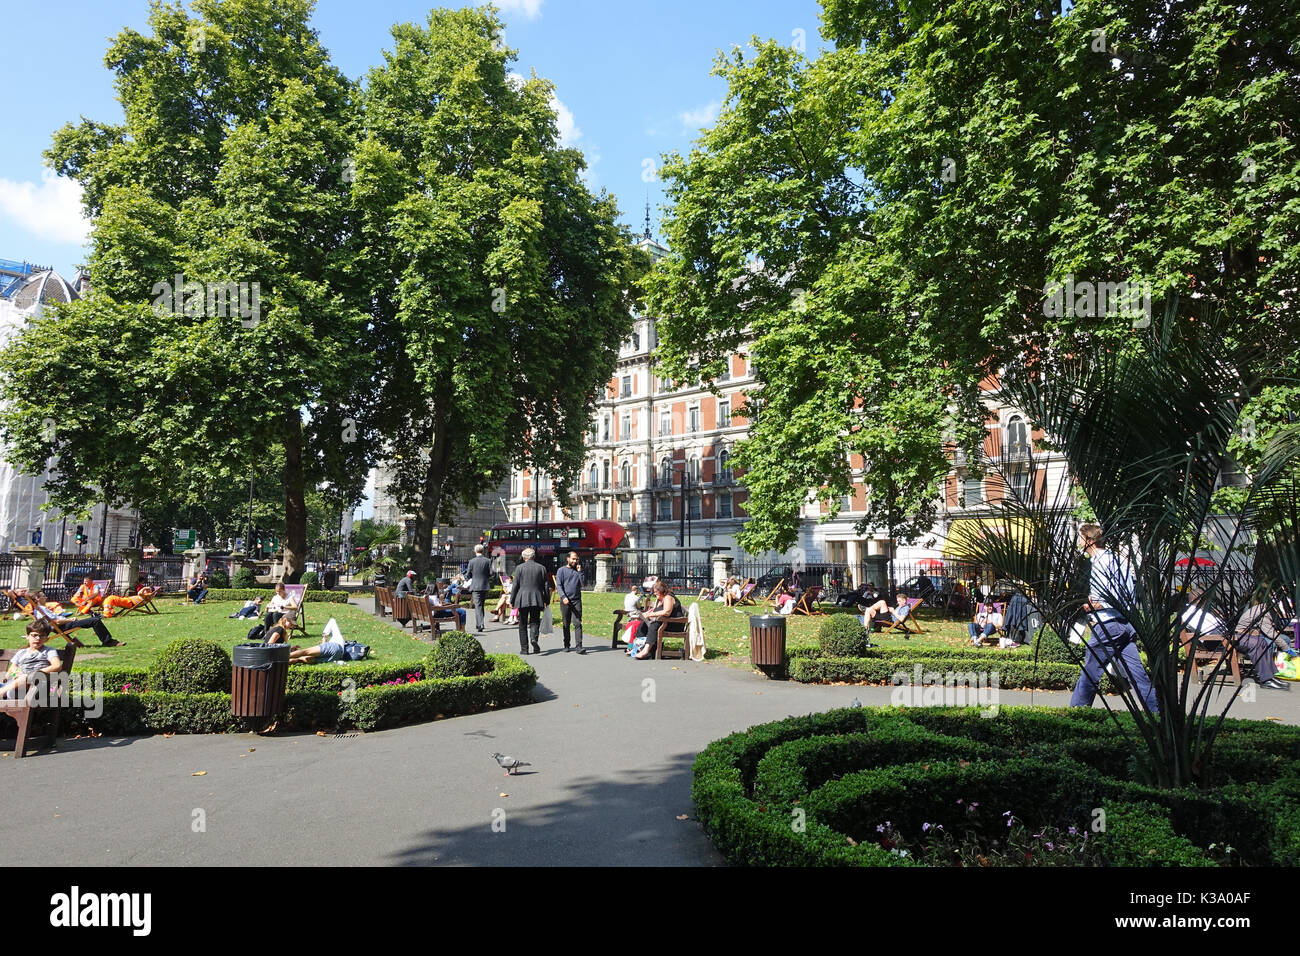 A view of people relaxing on a sunny summer day in Grosvenor Gardens in London UK Stock Photo